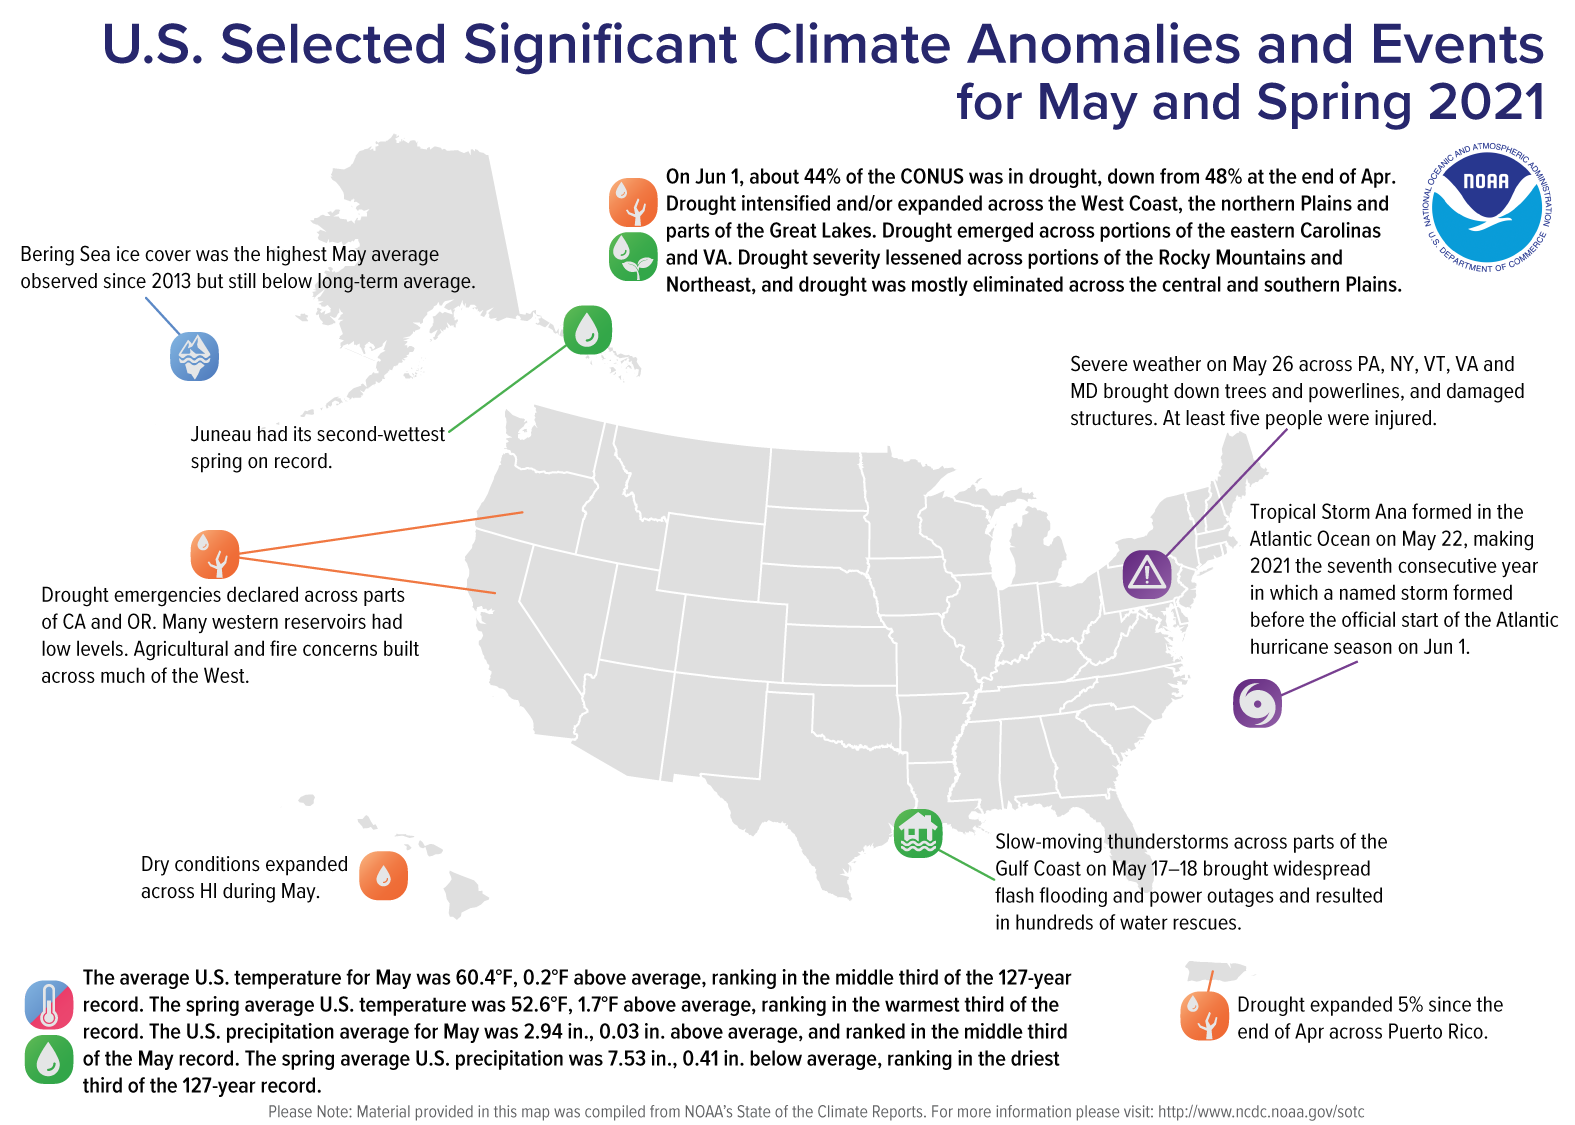 A map of the United States plotted with significant climate events that occurred during May 2021. Please see article text below as well as the full climate report highlights at http://bit.ly/USClimate202105.